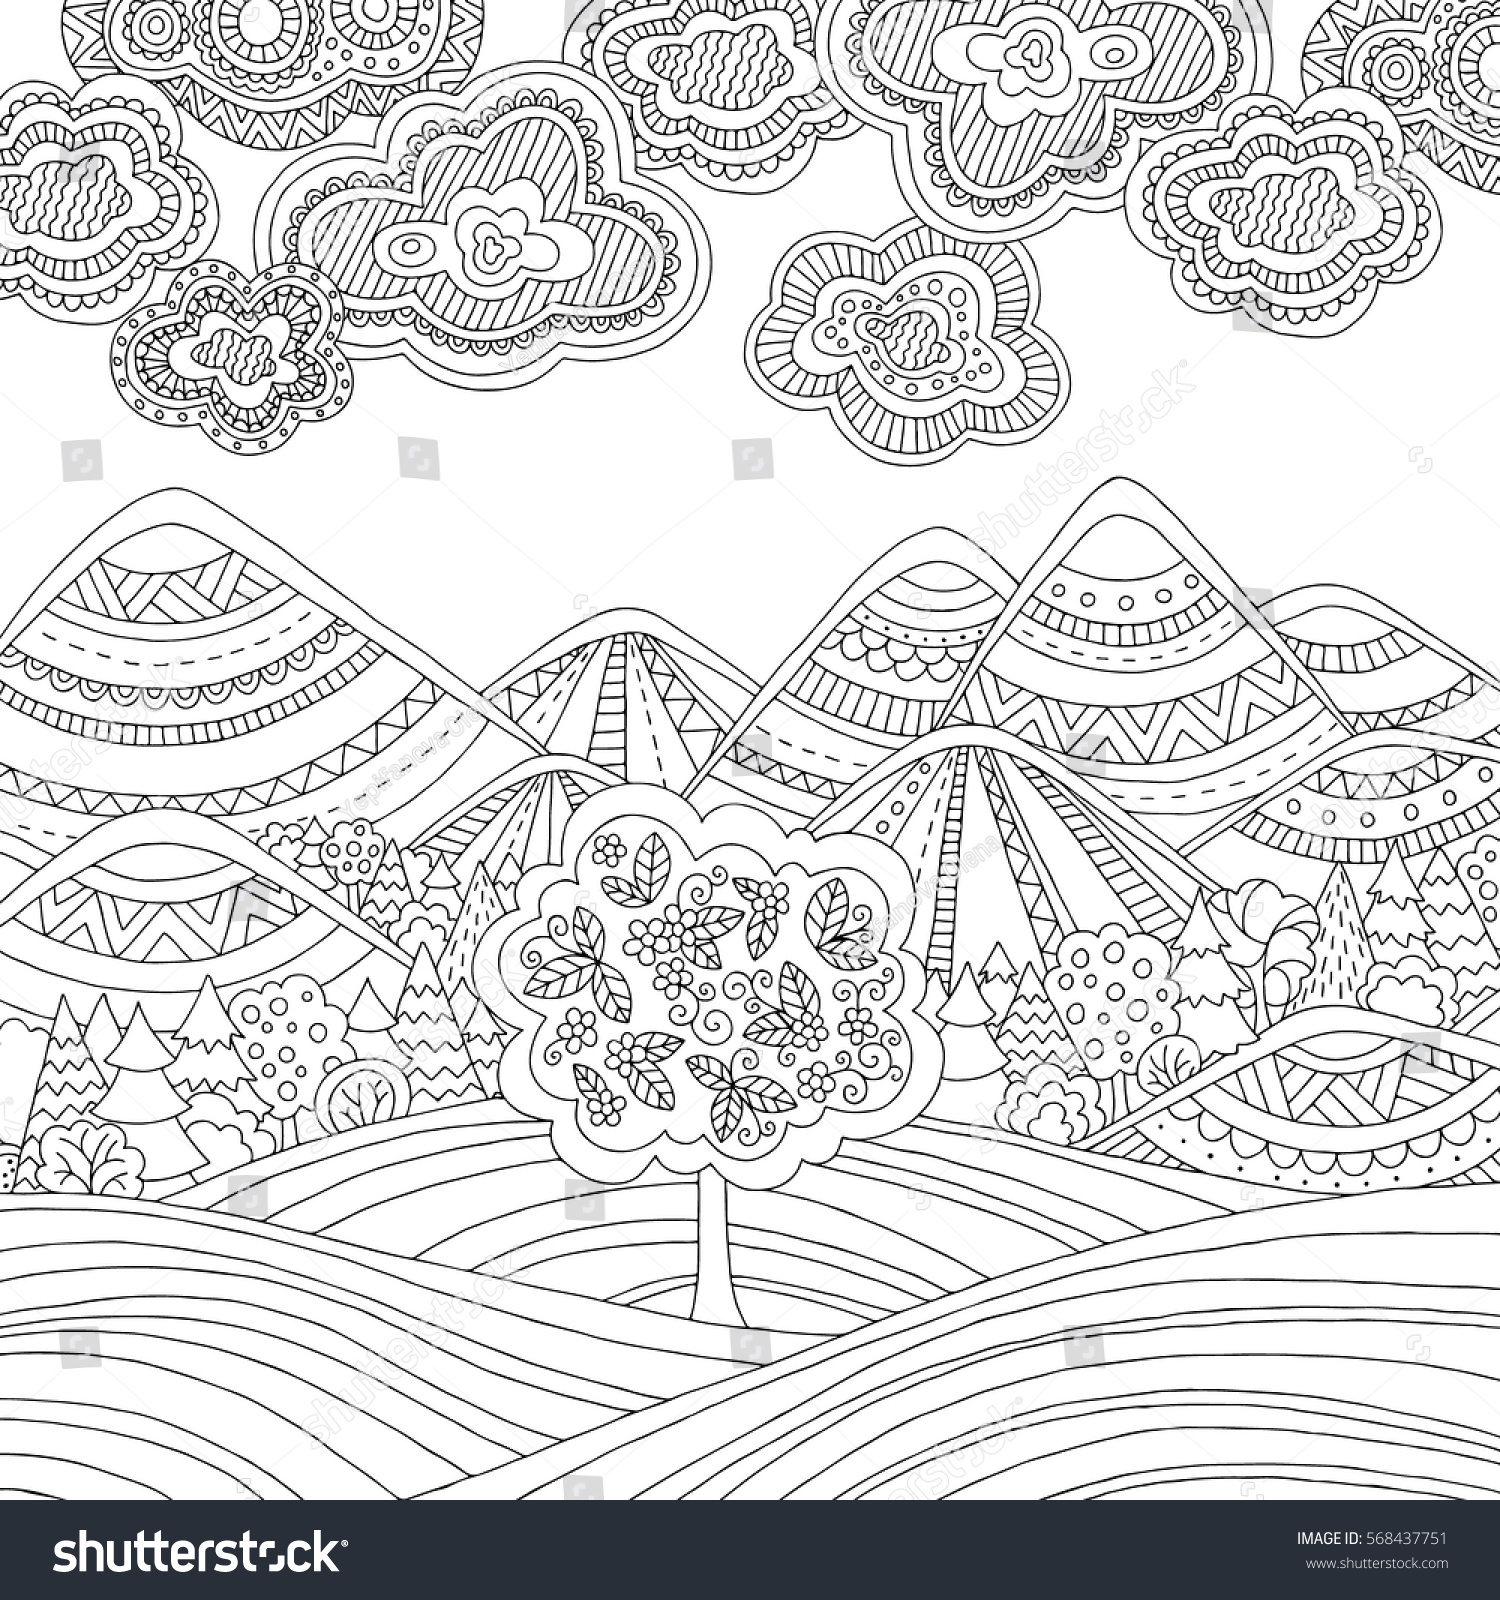 Download Printable Coloring Page Adults Mountain Landscape Stock Vector (Royalty Free) 568437751 ...